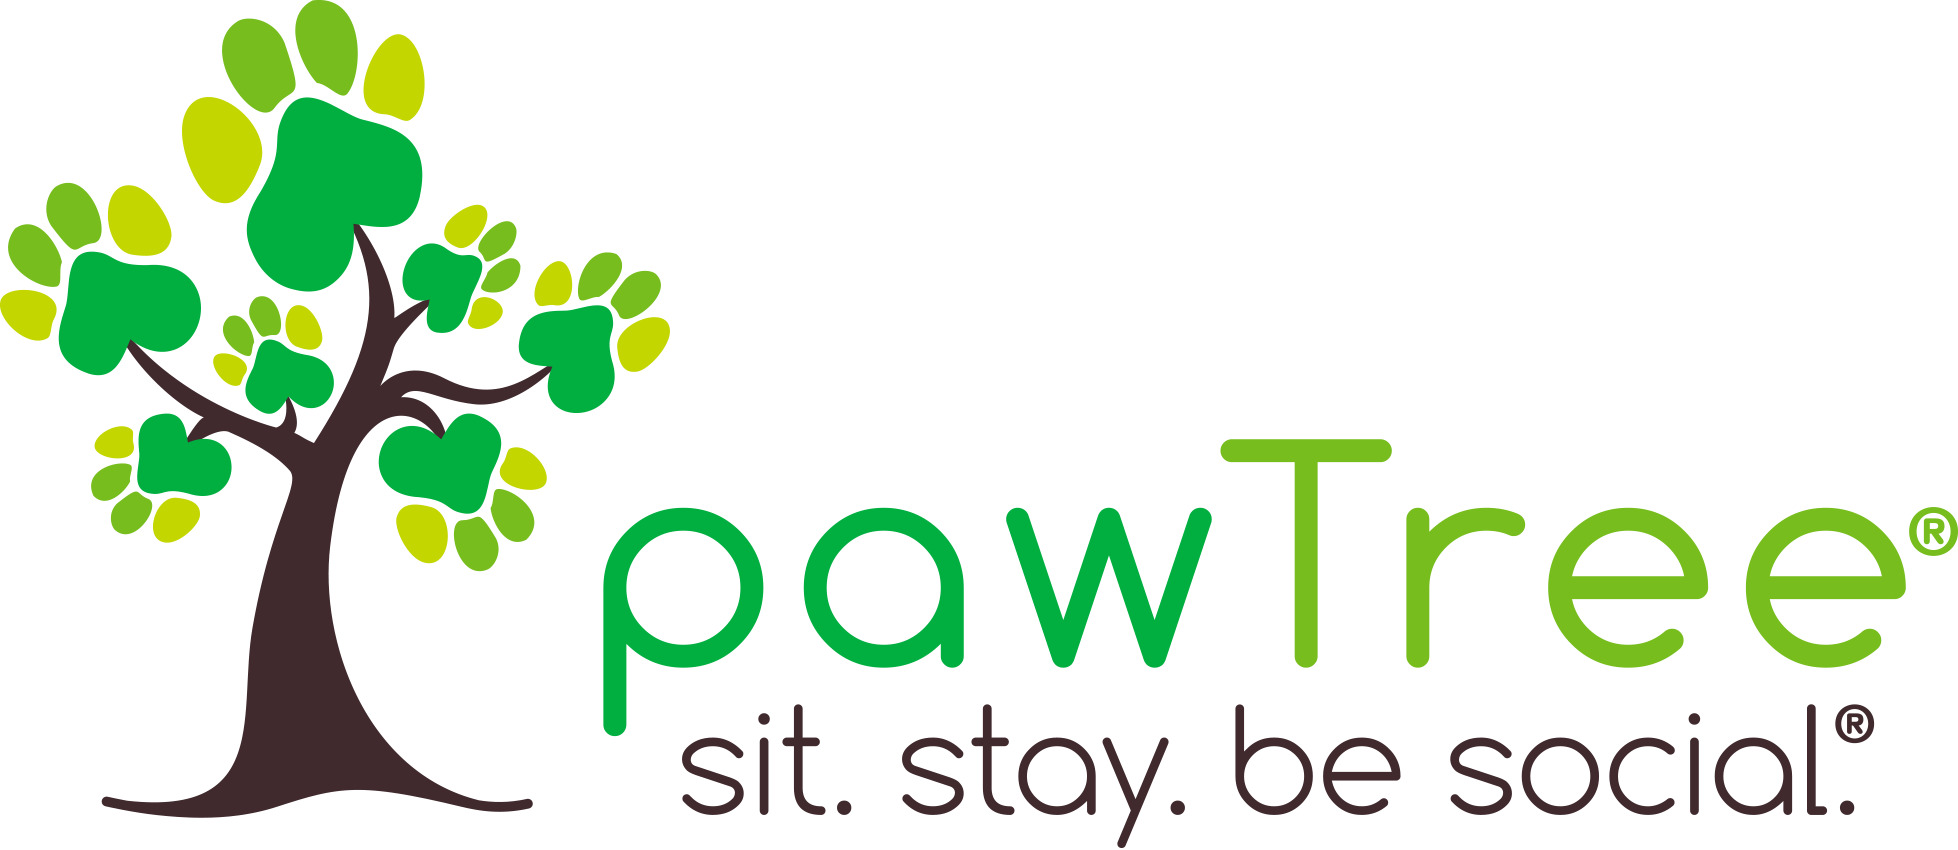 Up to 20% discount on Dog Food and other pet products at Pawtree.com $80